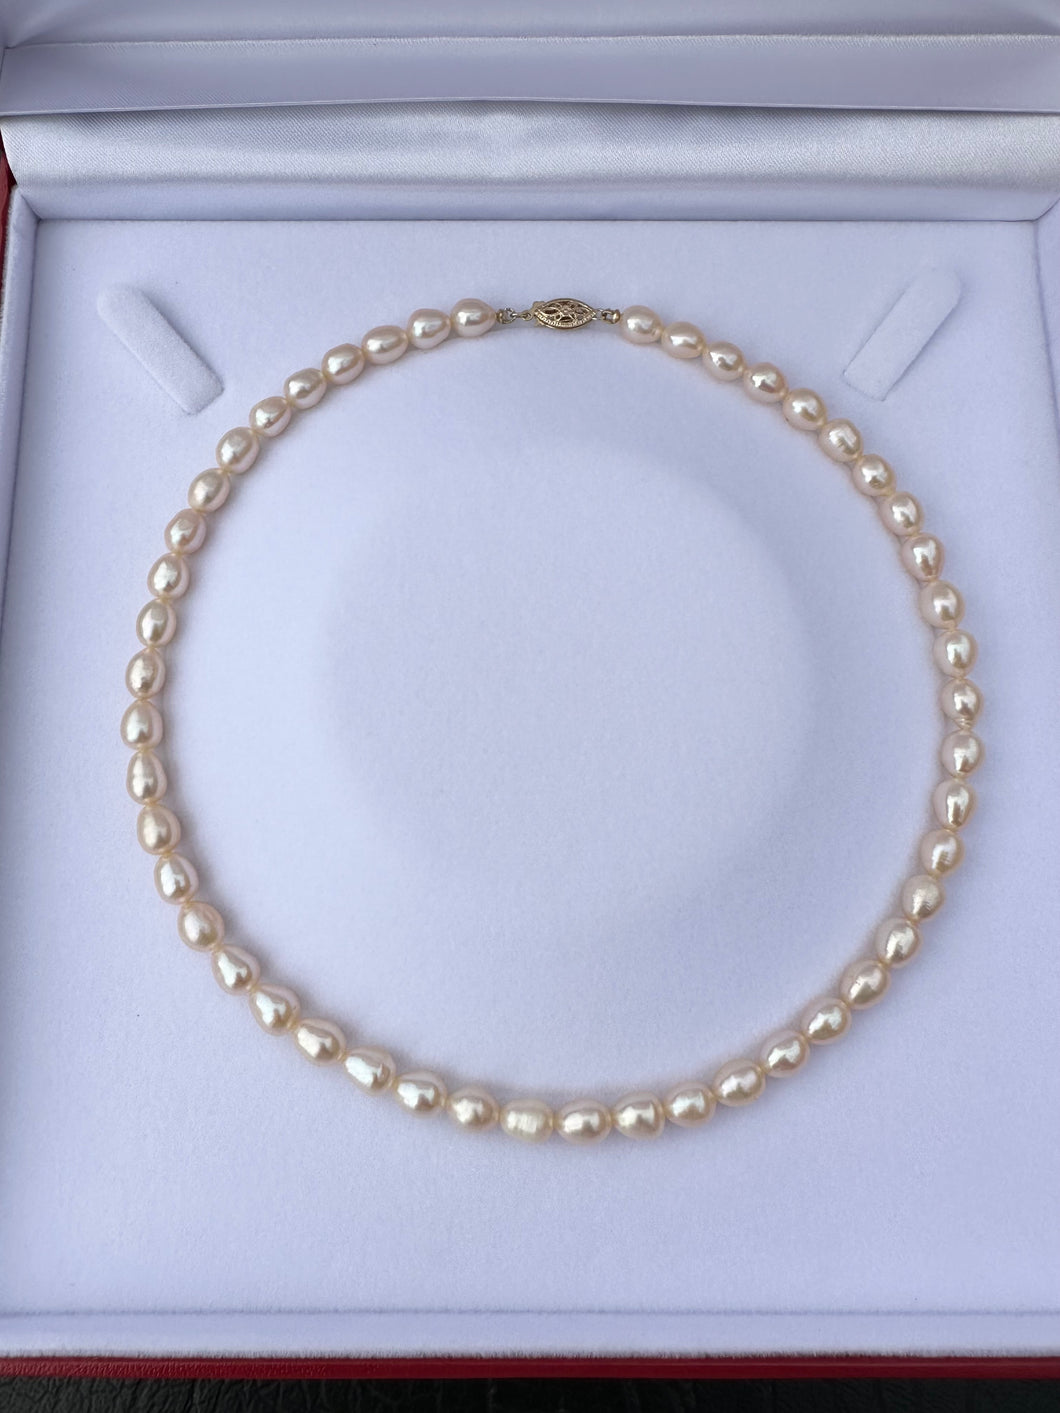 #418 - 14k Yellow Gold, Chinese Freshwater Pearl Necklace, 16” Length